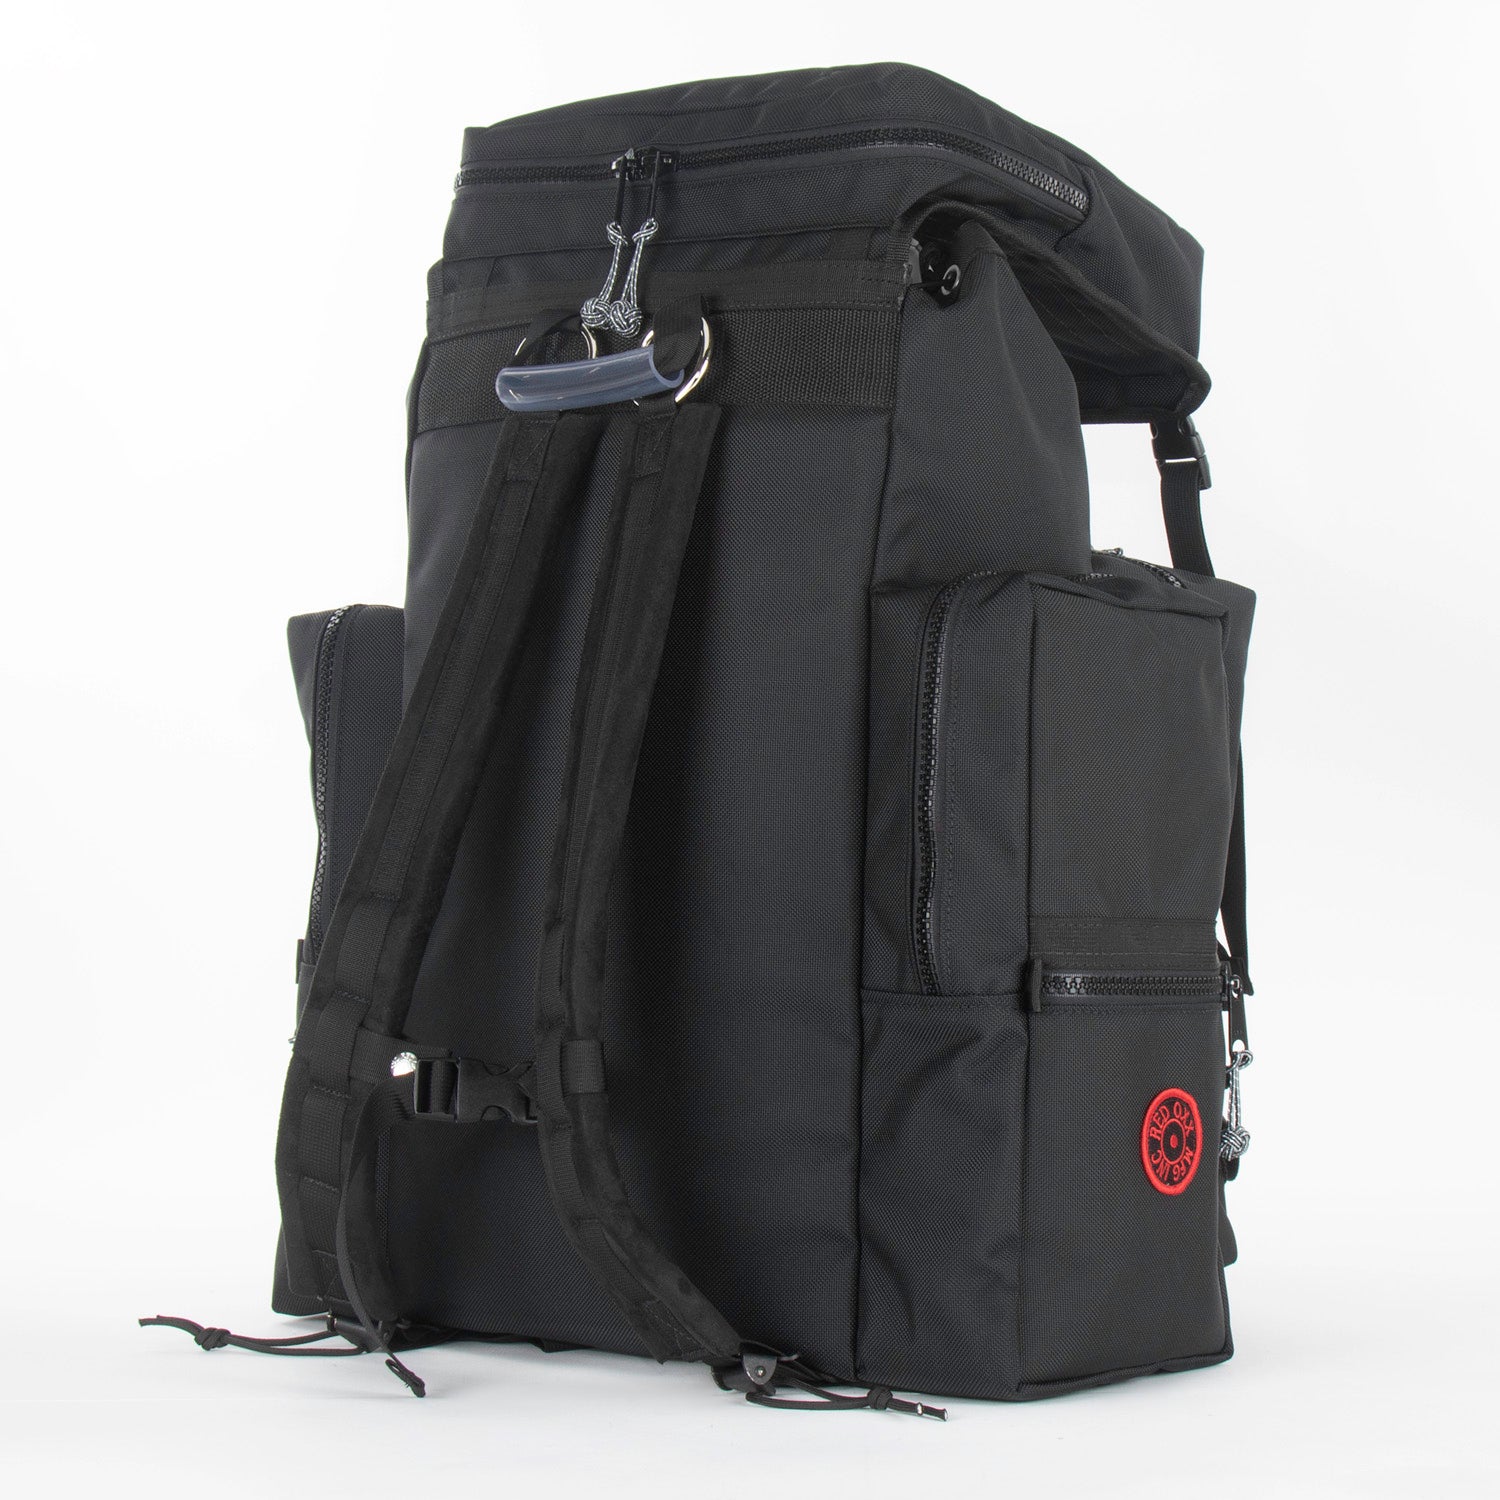  back right view of the Rail King Rucksack